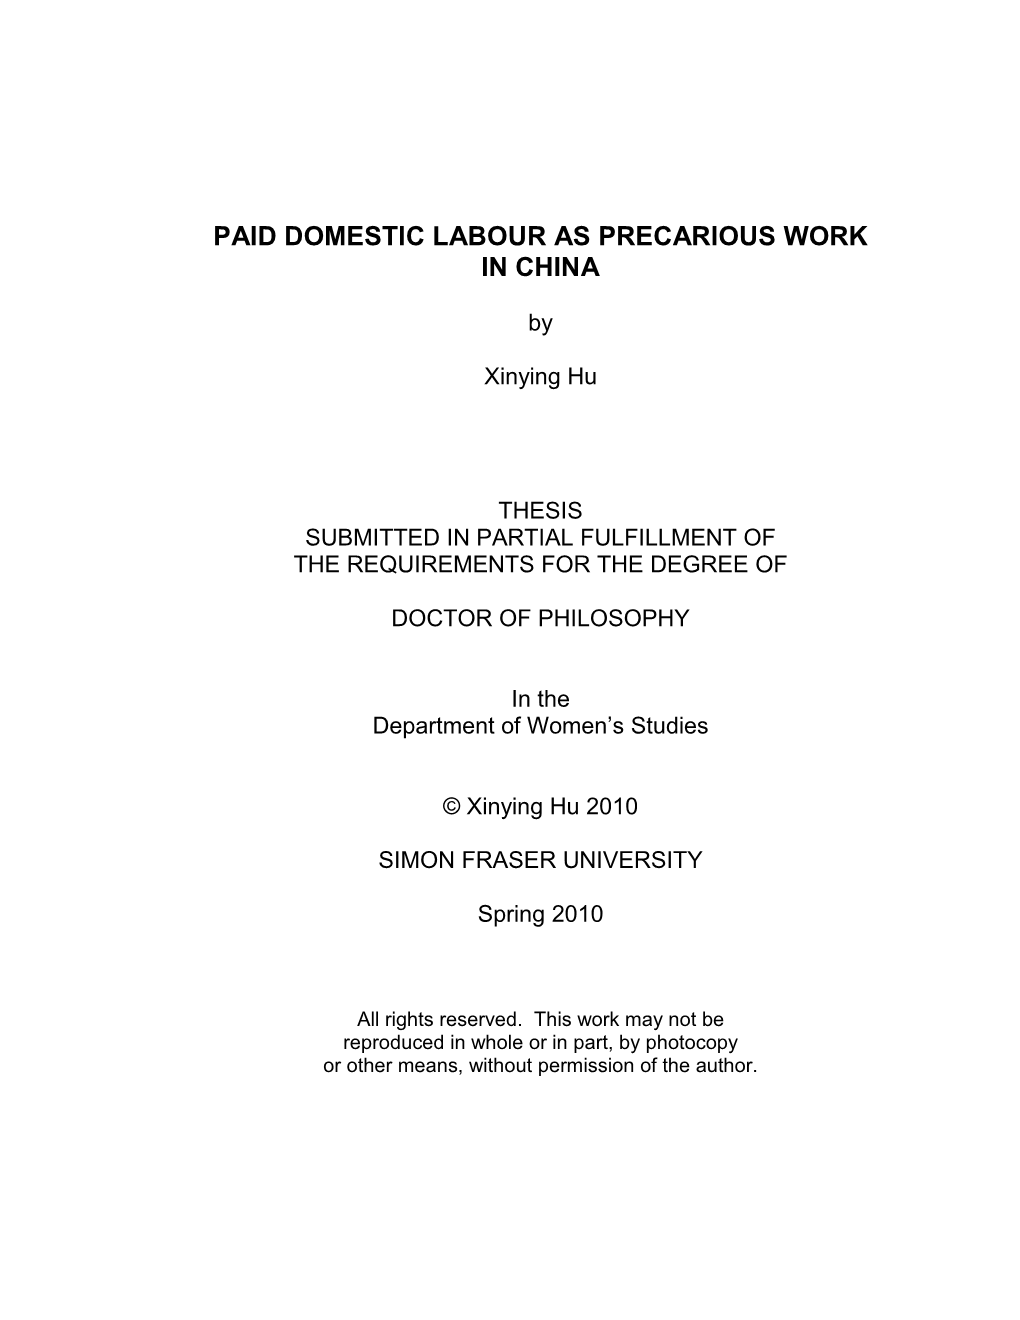 Paid Domestic Labour As Precarious Work in China